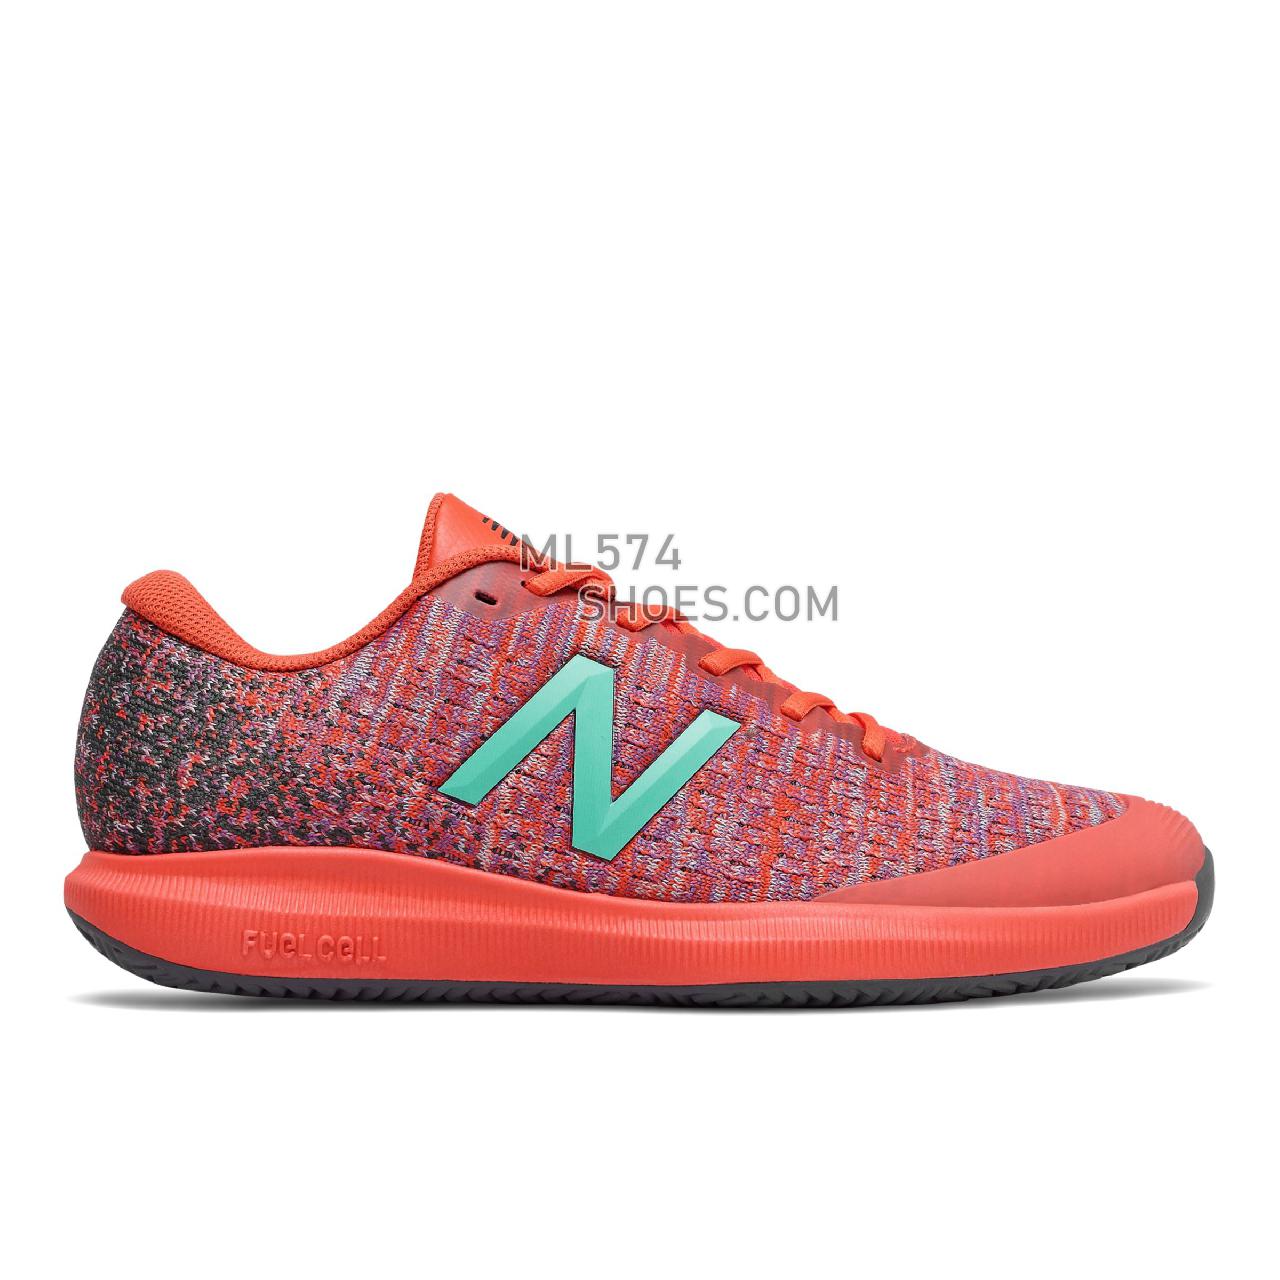 New Balance Clay Court Fuel Cell 996v4 - Men's Tennis - Ghost Pepper with Black Spruce - MCY996G4